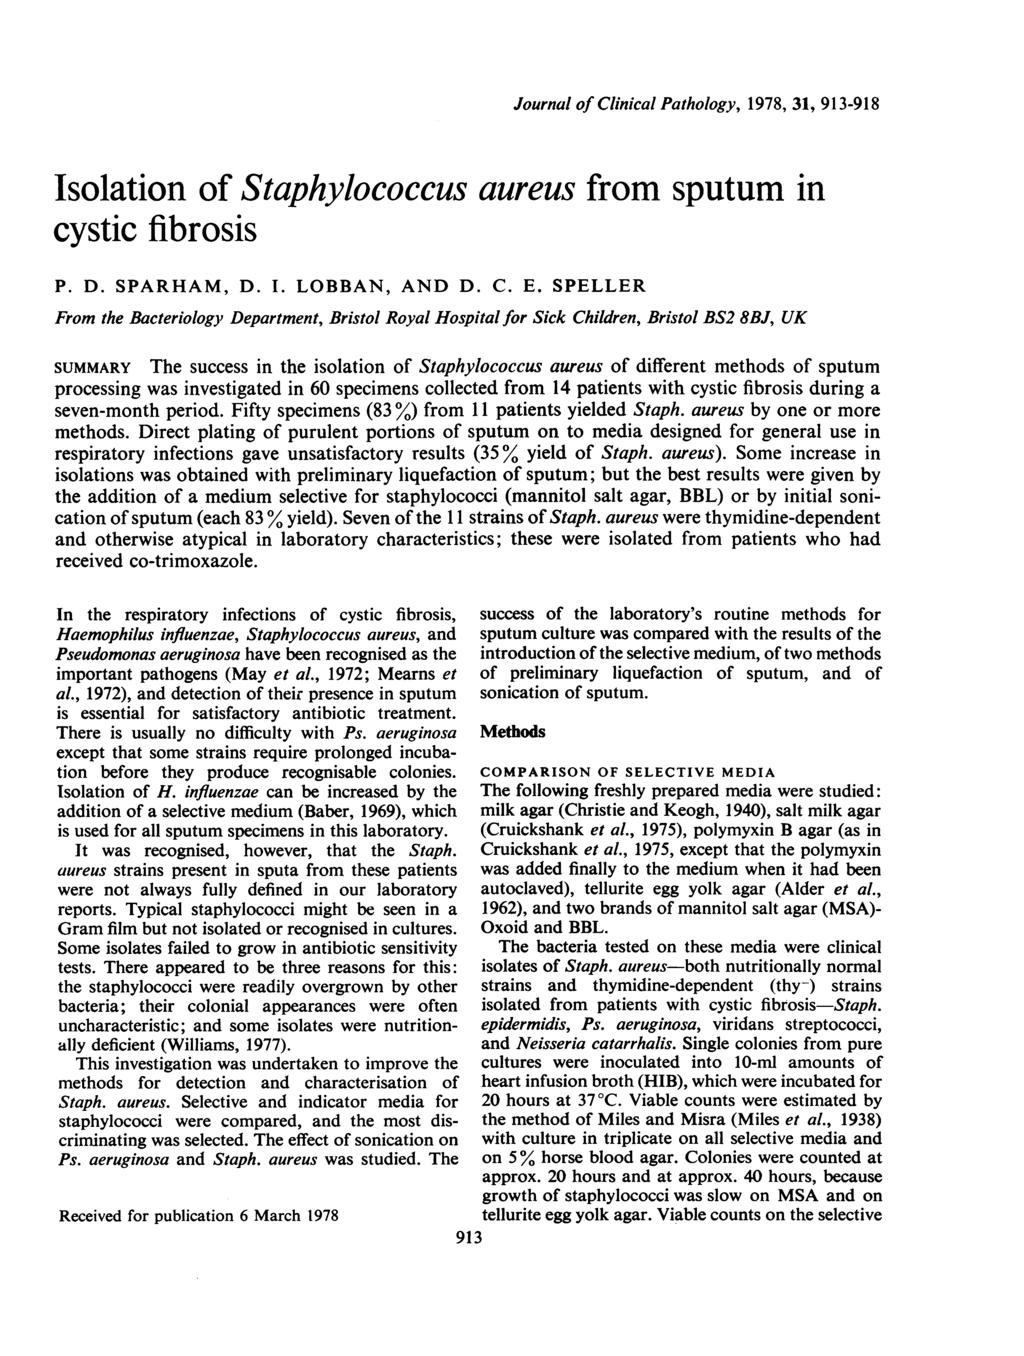 Journal of Clinical Pathology, 1978, 31, 913-918 Isolation of Staphylococcus aureus from sputum in cystic fibrosis P. D. SPARHAM, D. I. LOBBAN, AND D. C. E.